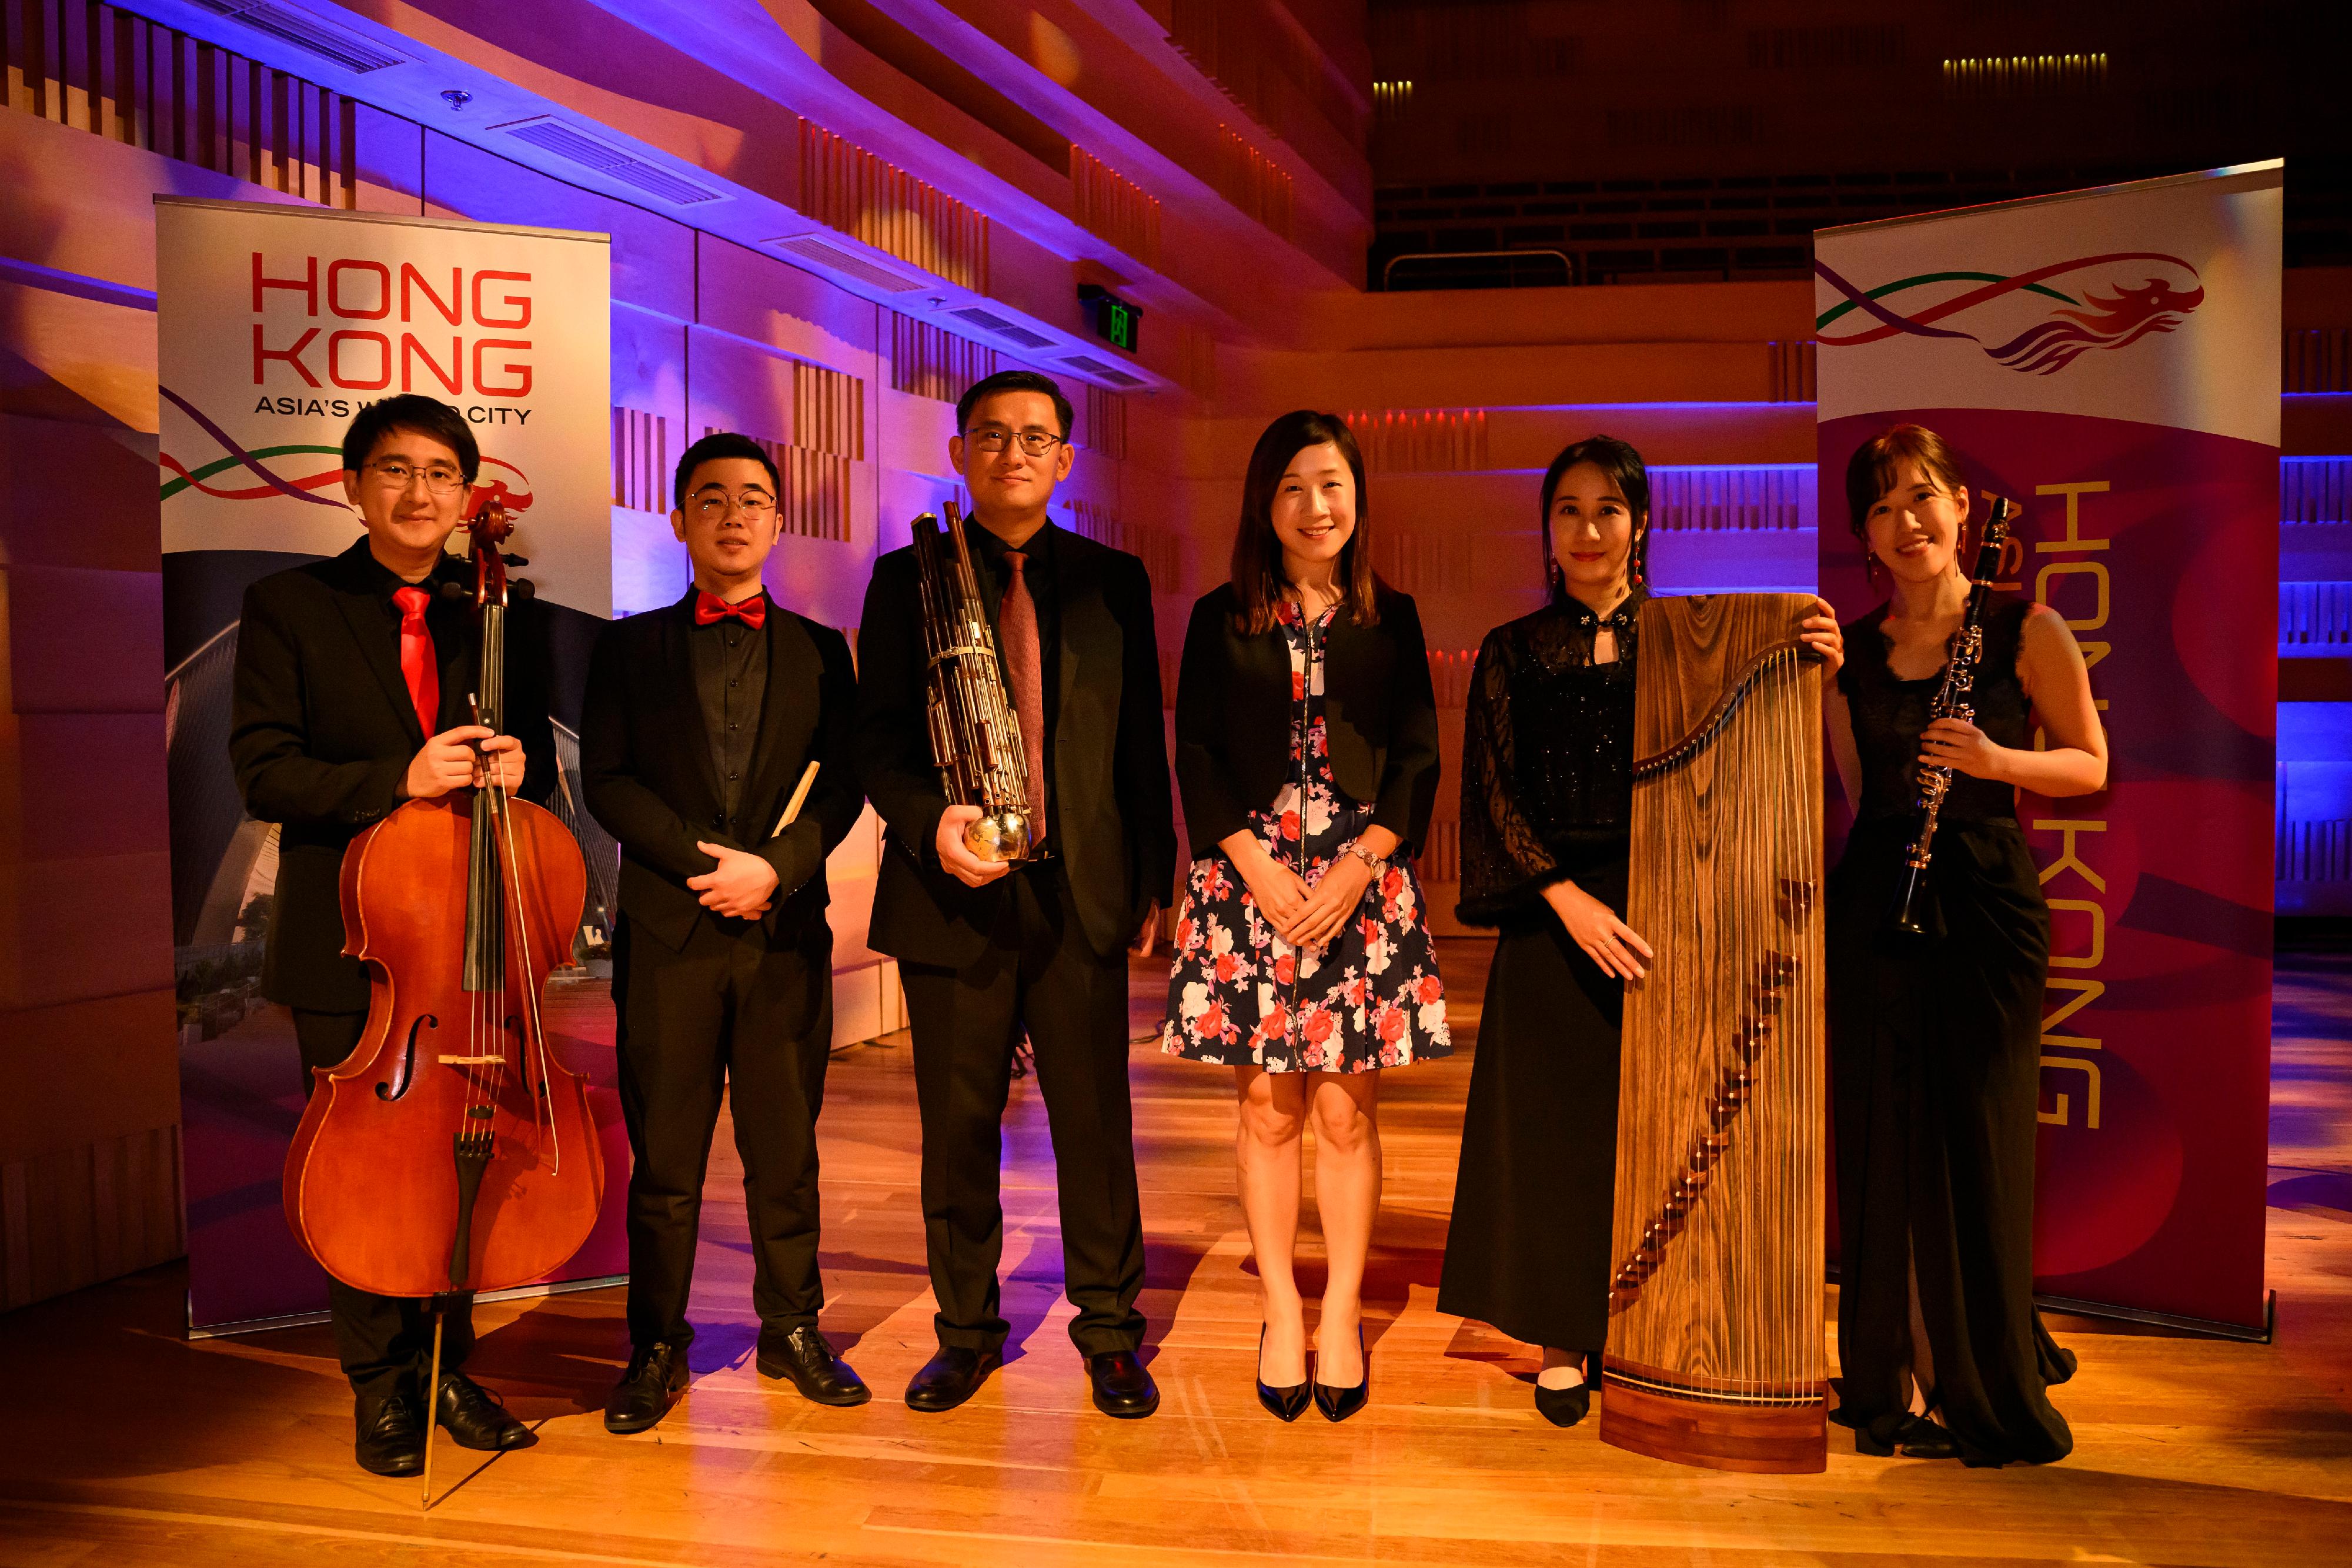 The Hong Kong Economic and Trade Office, Sydney (Sydney ETO) supported "A Melodious Chat of Music Concert" in Sydney, Australia, on February 19 to celebrate Chinese New Year. Photo shows the Director of the Sydney ETO, Miss Trista Lim (third right), posing  with the ensemble.